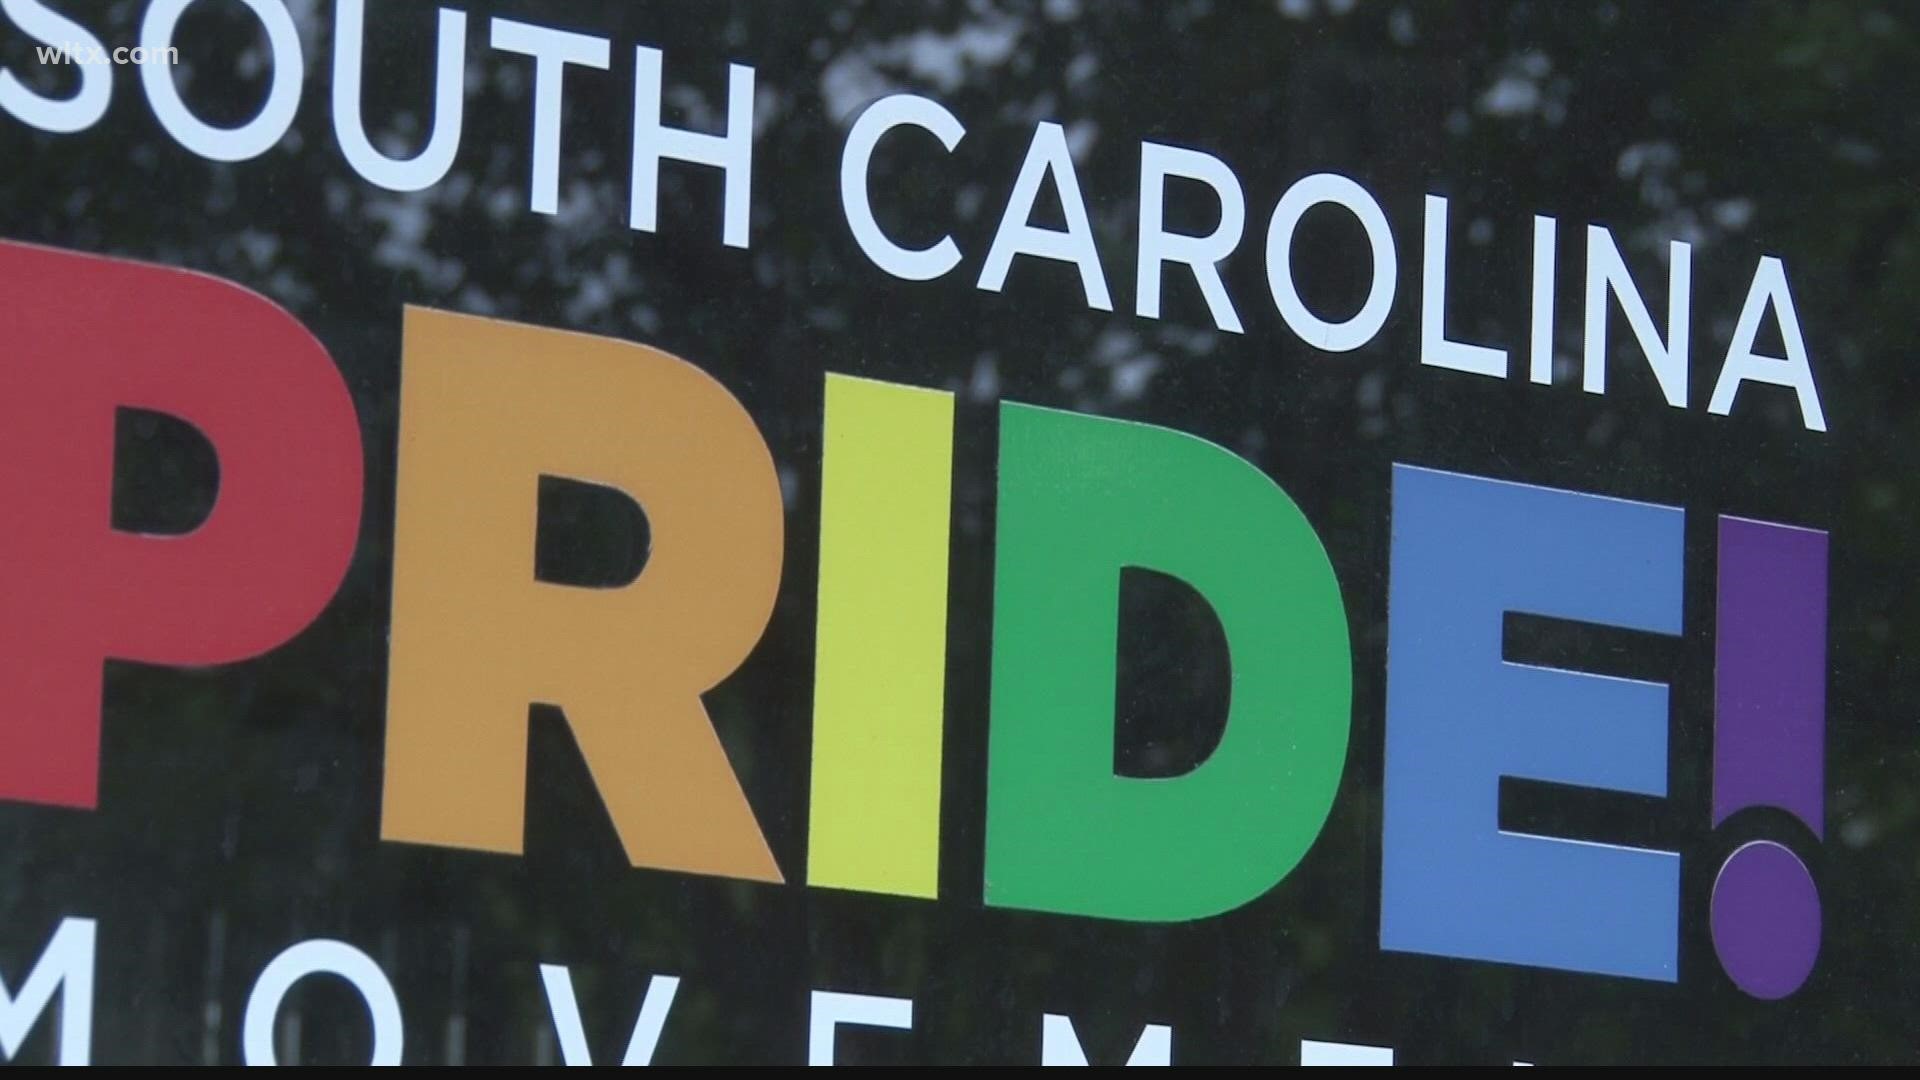 According to a report done by the Human Rights Campaign, Columbia was ranked the best city in South Carolina for the LGBTQ+ equality.